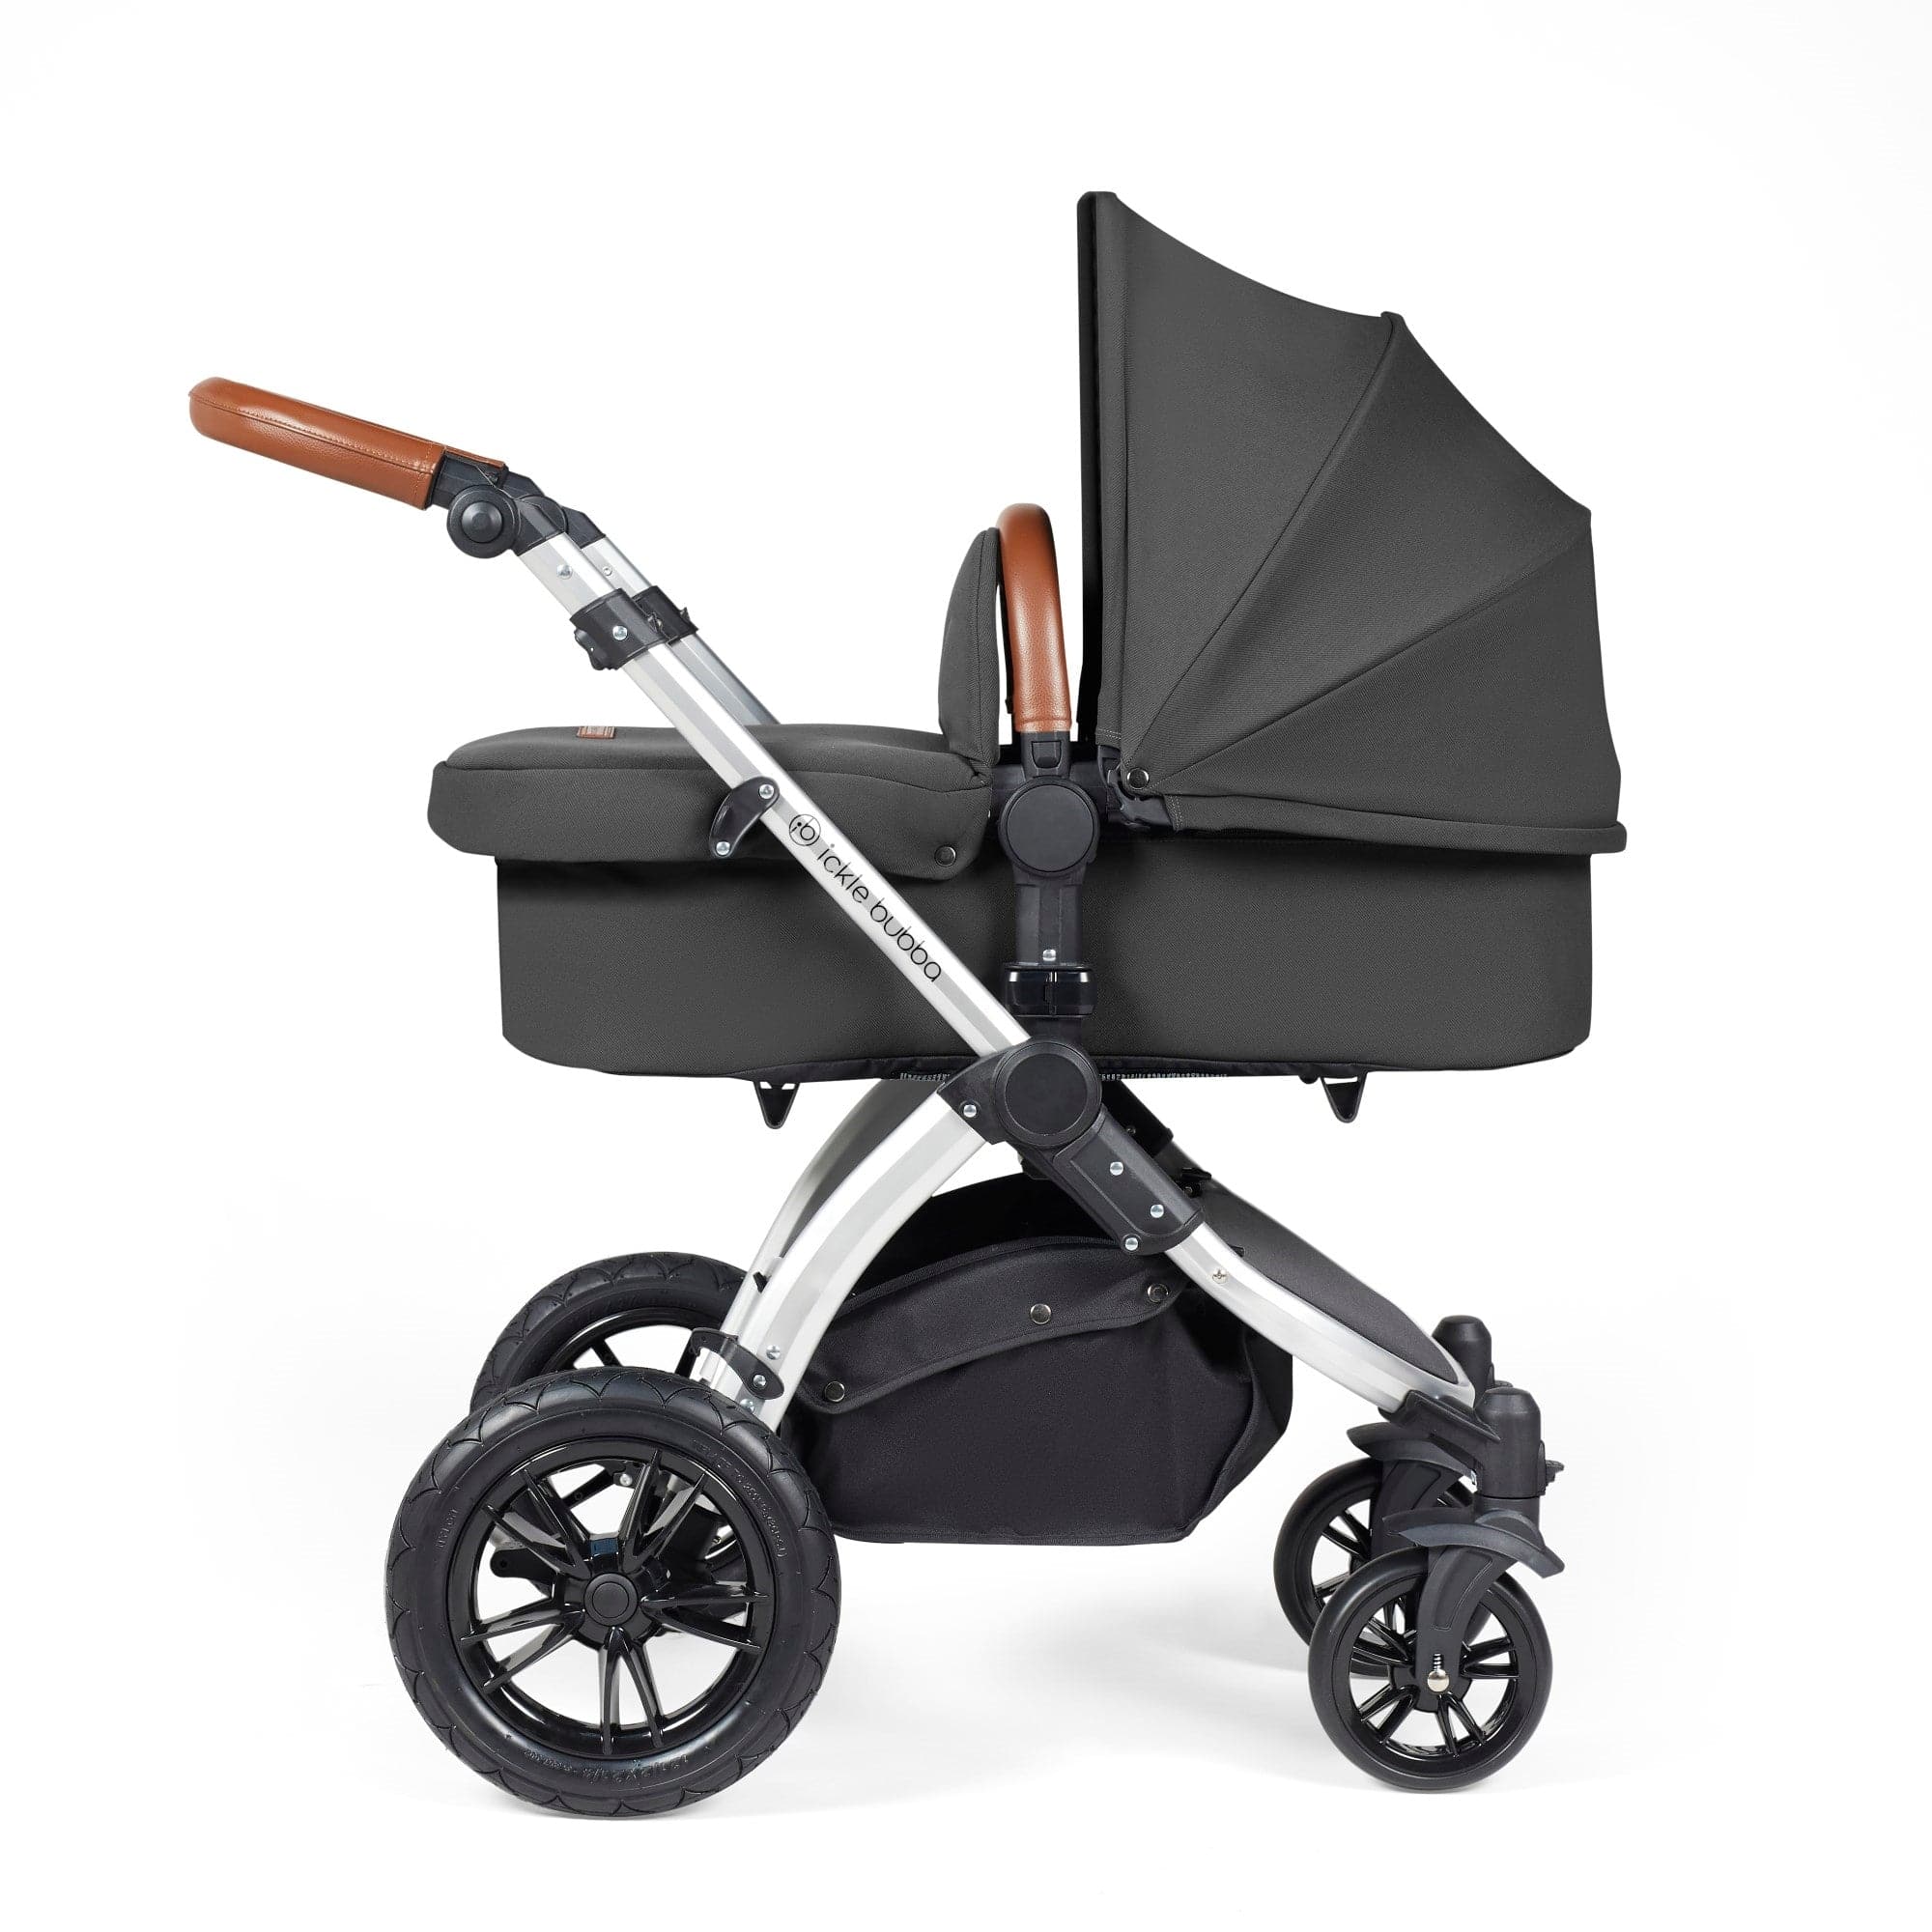 Ickle Bubba Stomp Luxe All-in-One I-Size Travel System With Isofix Base - Silver / Charcoal Grey / Tan - For Your Little One